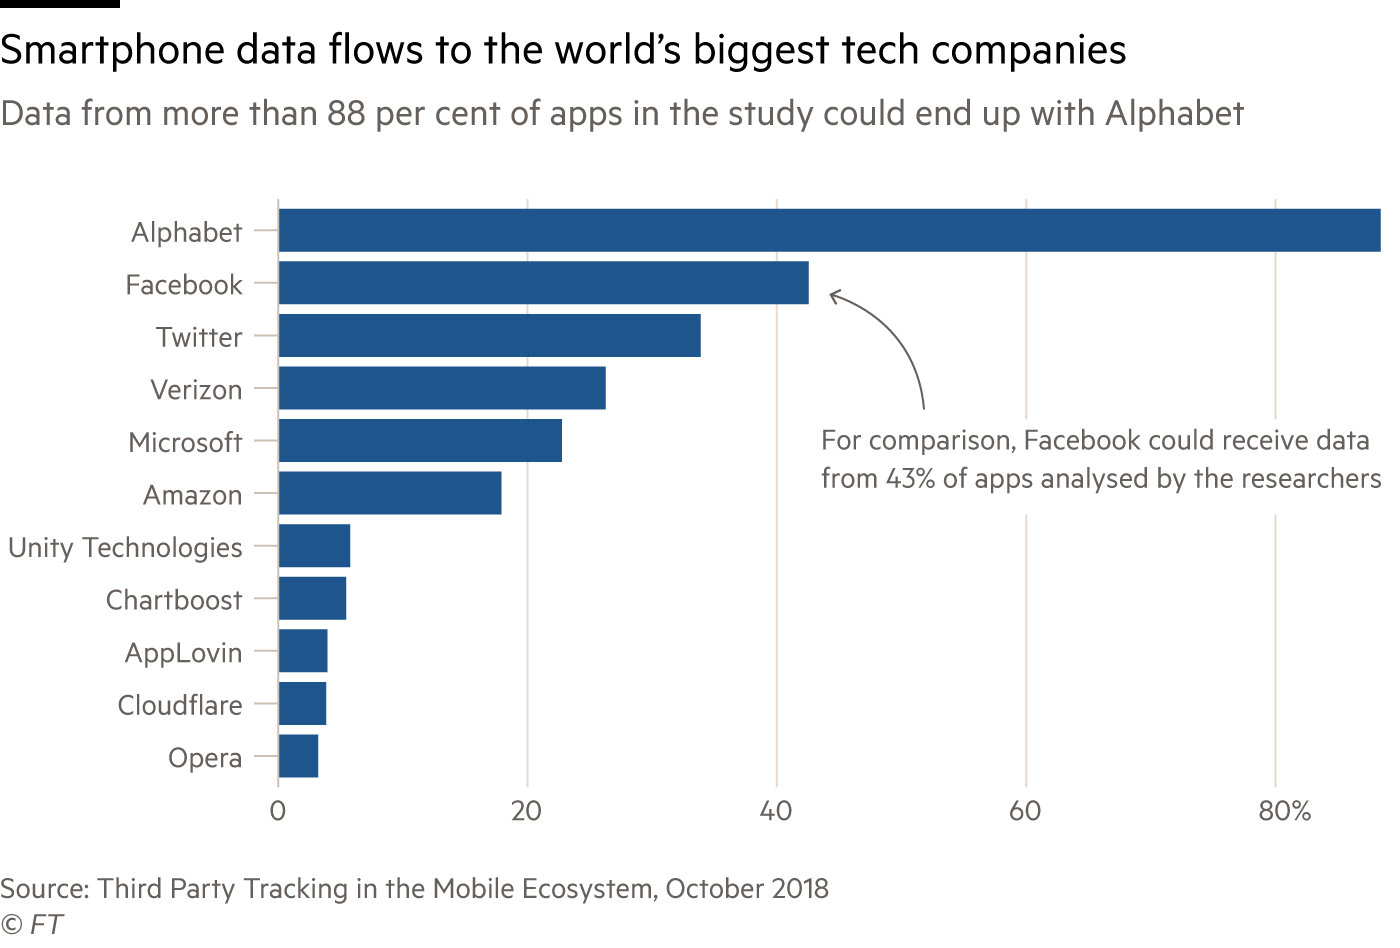 Bar chart showing smartphone data flows to the world's biggest tech companies. Data from more than 88 per cent of apps in the study could end up with Alphabet